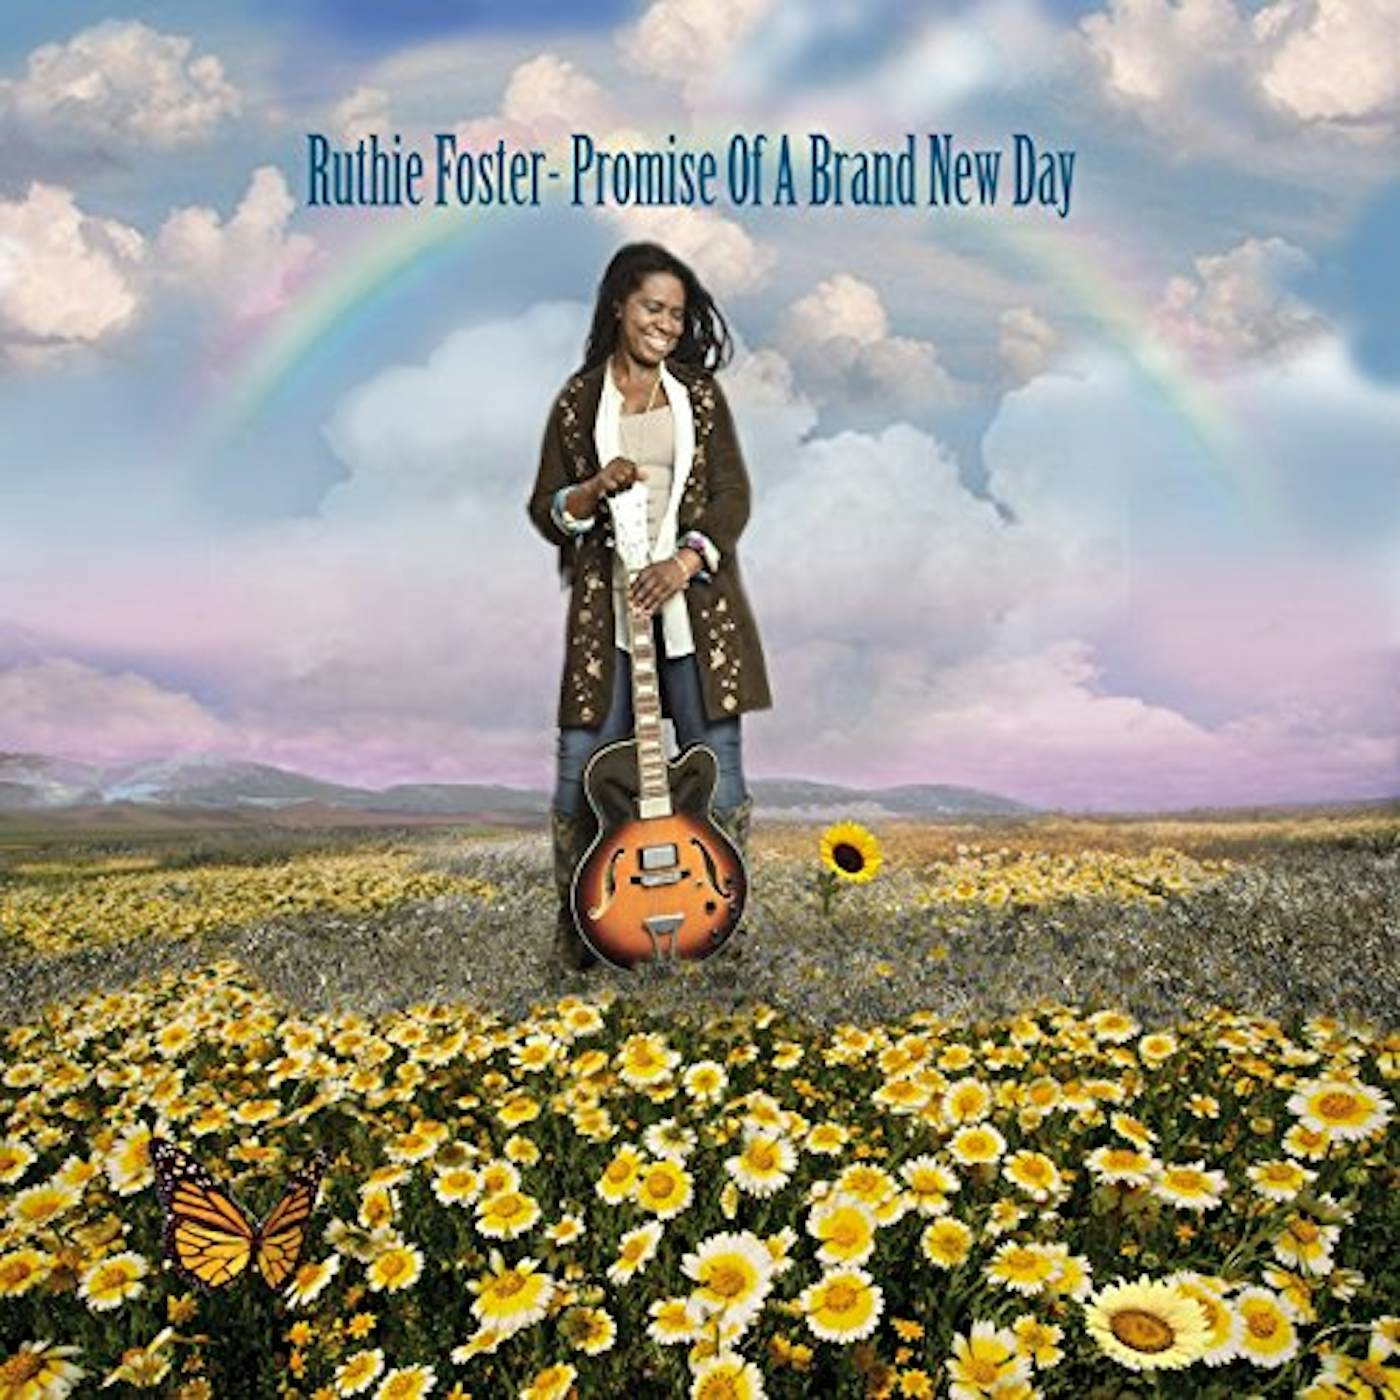 Ruthie Foster PROMISE OF A BRAND NEW DAY CD